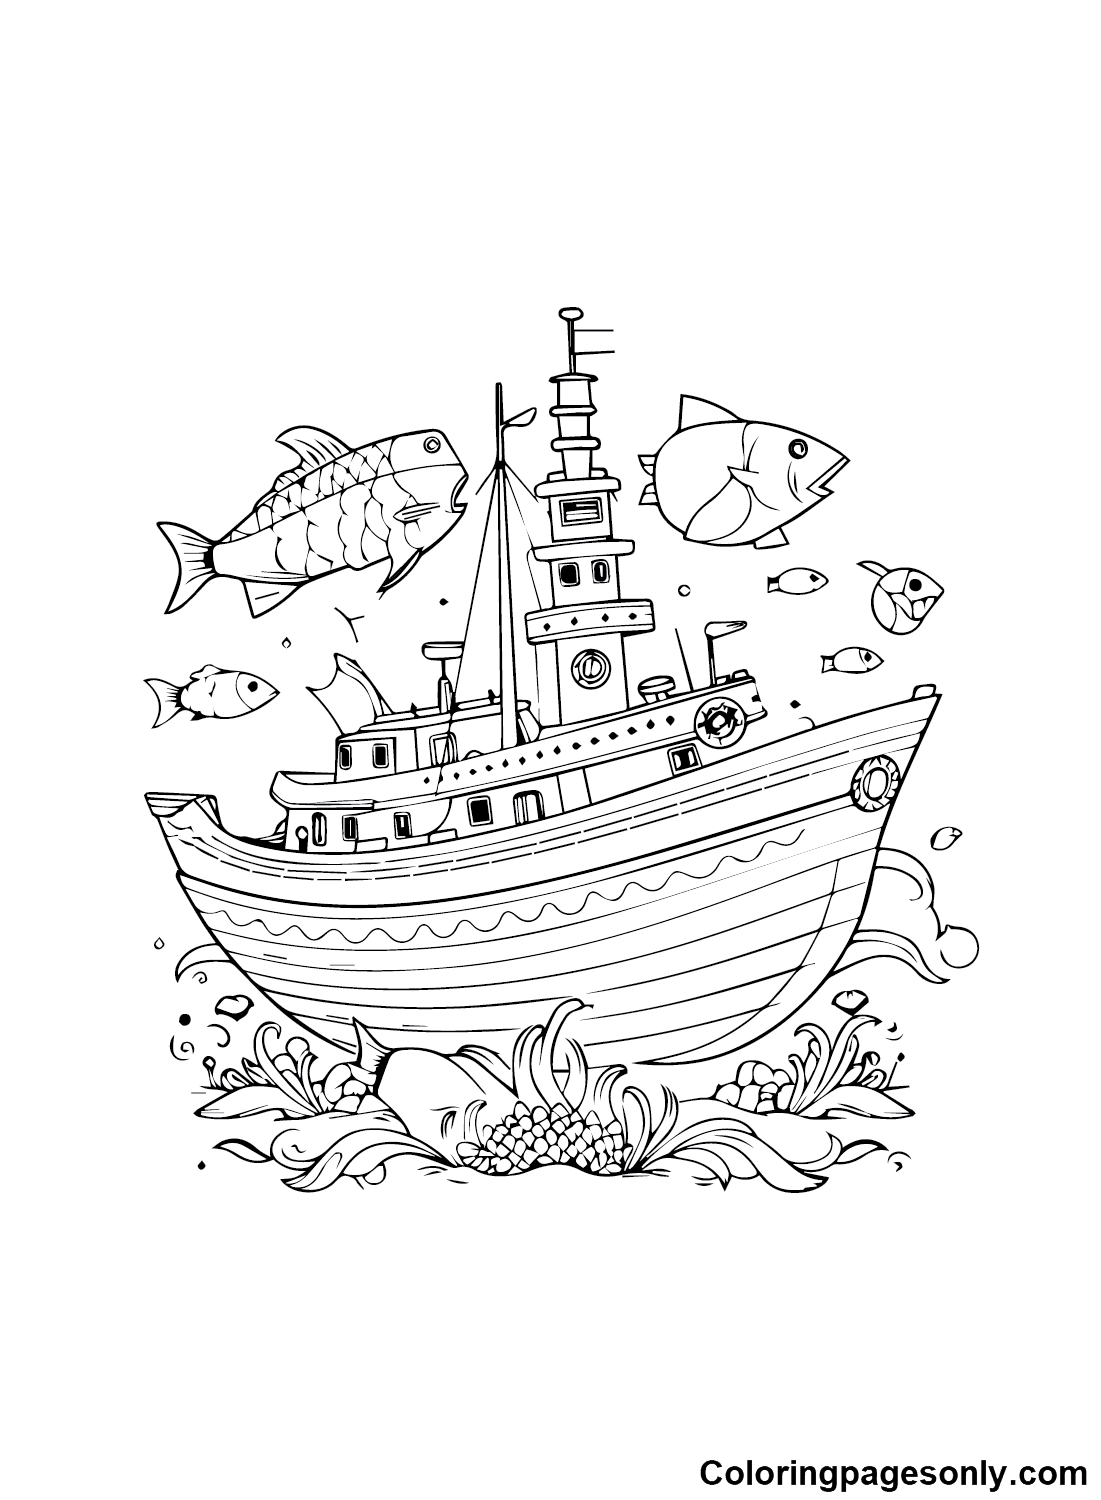 Fishing Ship Images Coloring Page